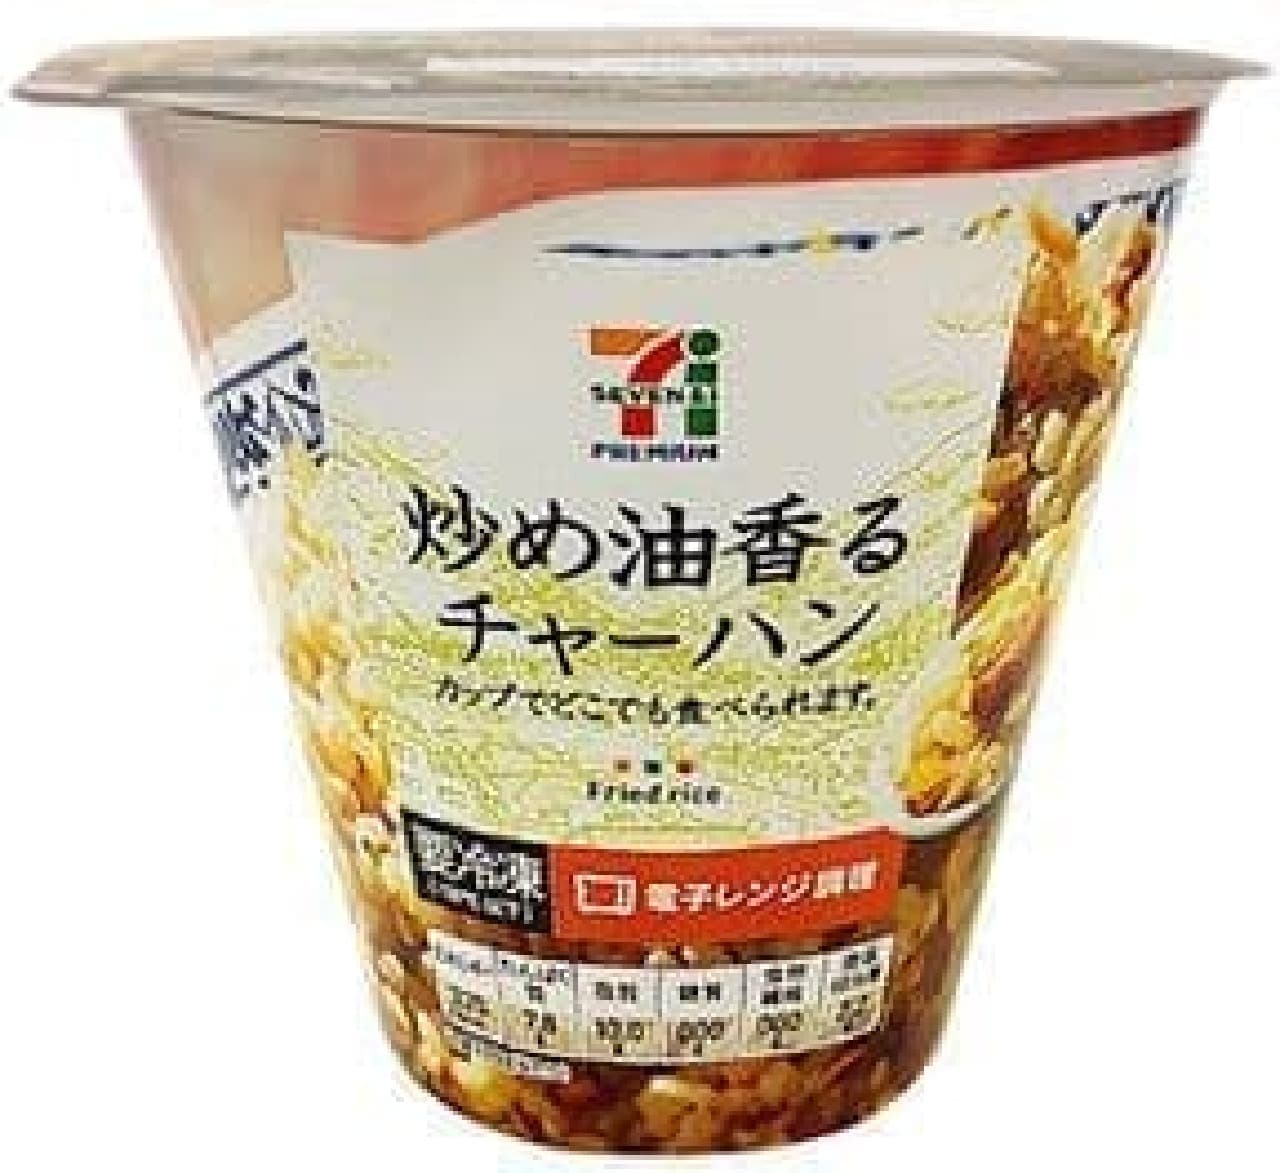 7-ELEVEN Premium "Stir-fried oily cup fried rice"